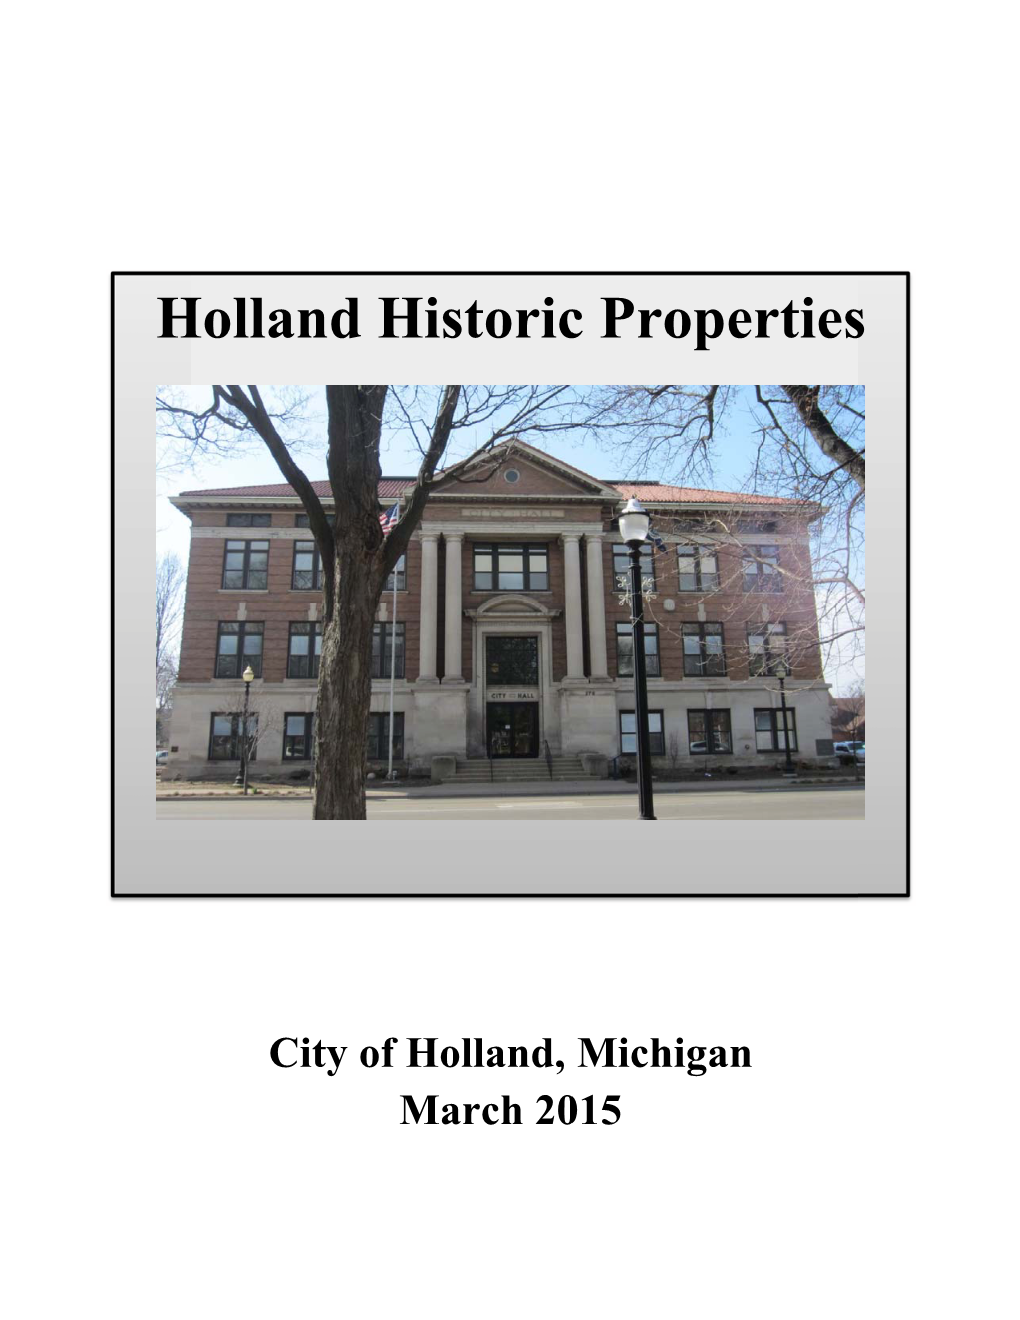 Other Holland Historic Properties